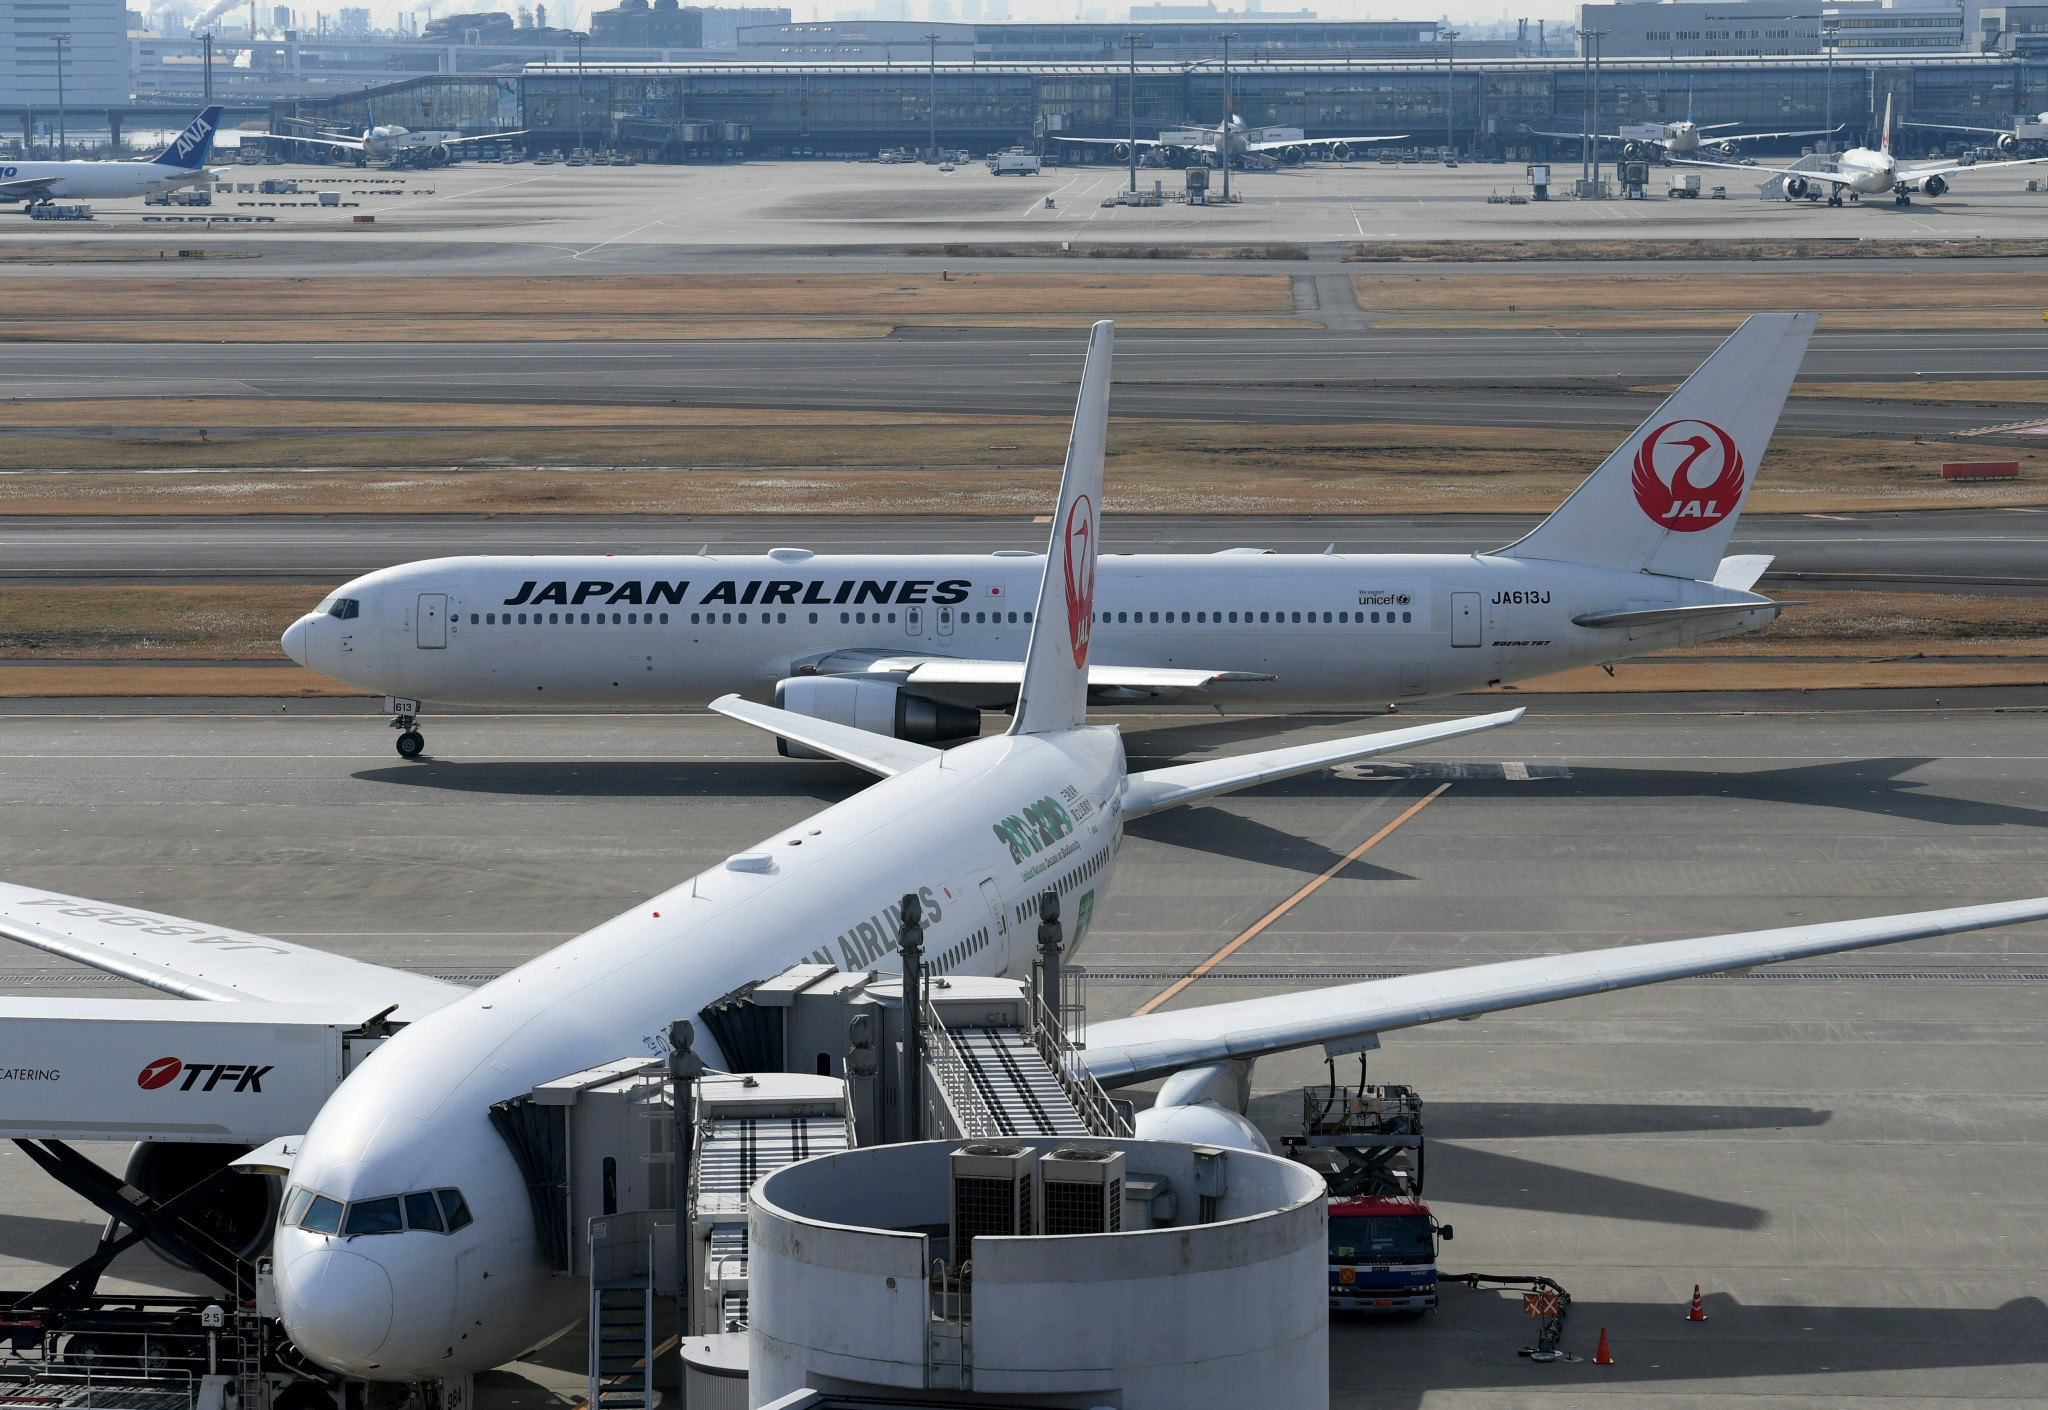 Japan Airlines has today revealed plans to launch a budget carrier ©Getty Images